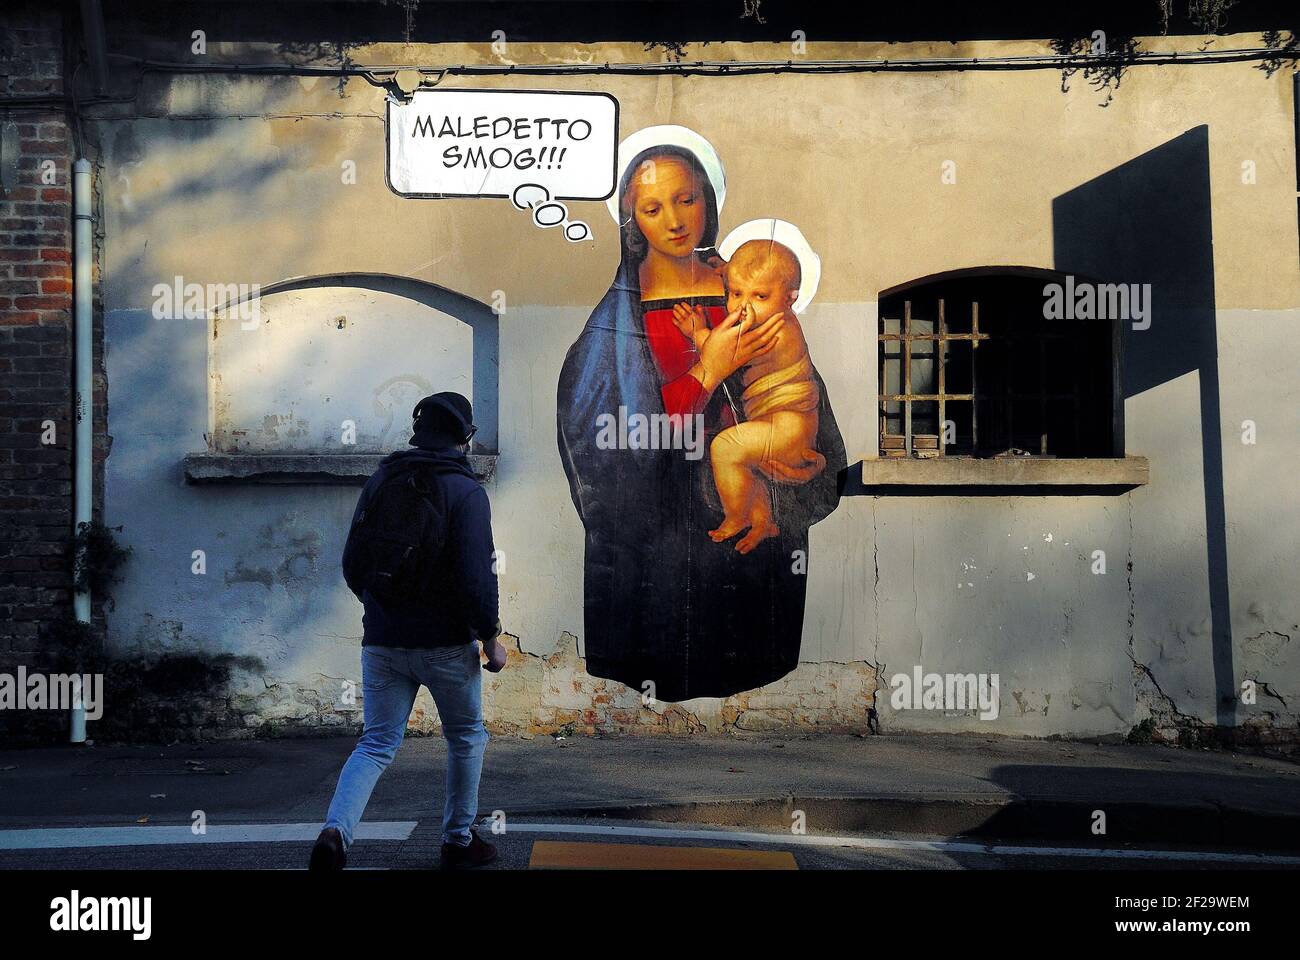 Padua, Italy. A mural of Mary, mother of Jesus against smog. Virgin Mary plugs with her fingers the nose of baby Jesus. Stock Photo